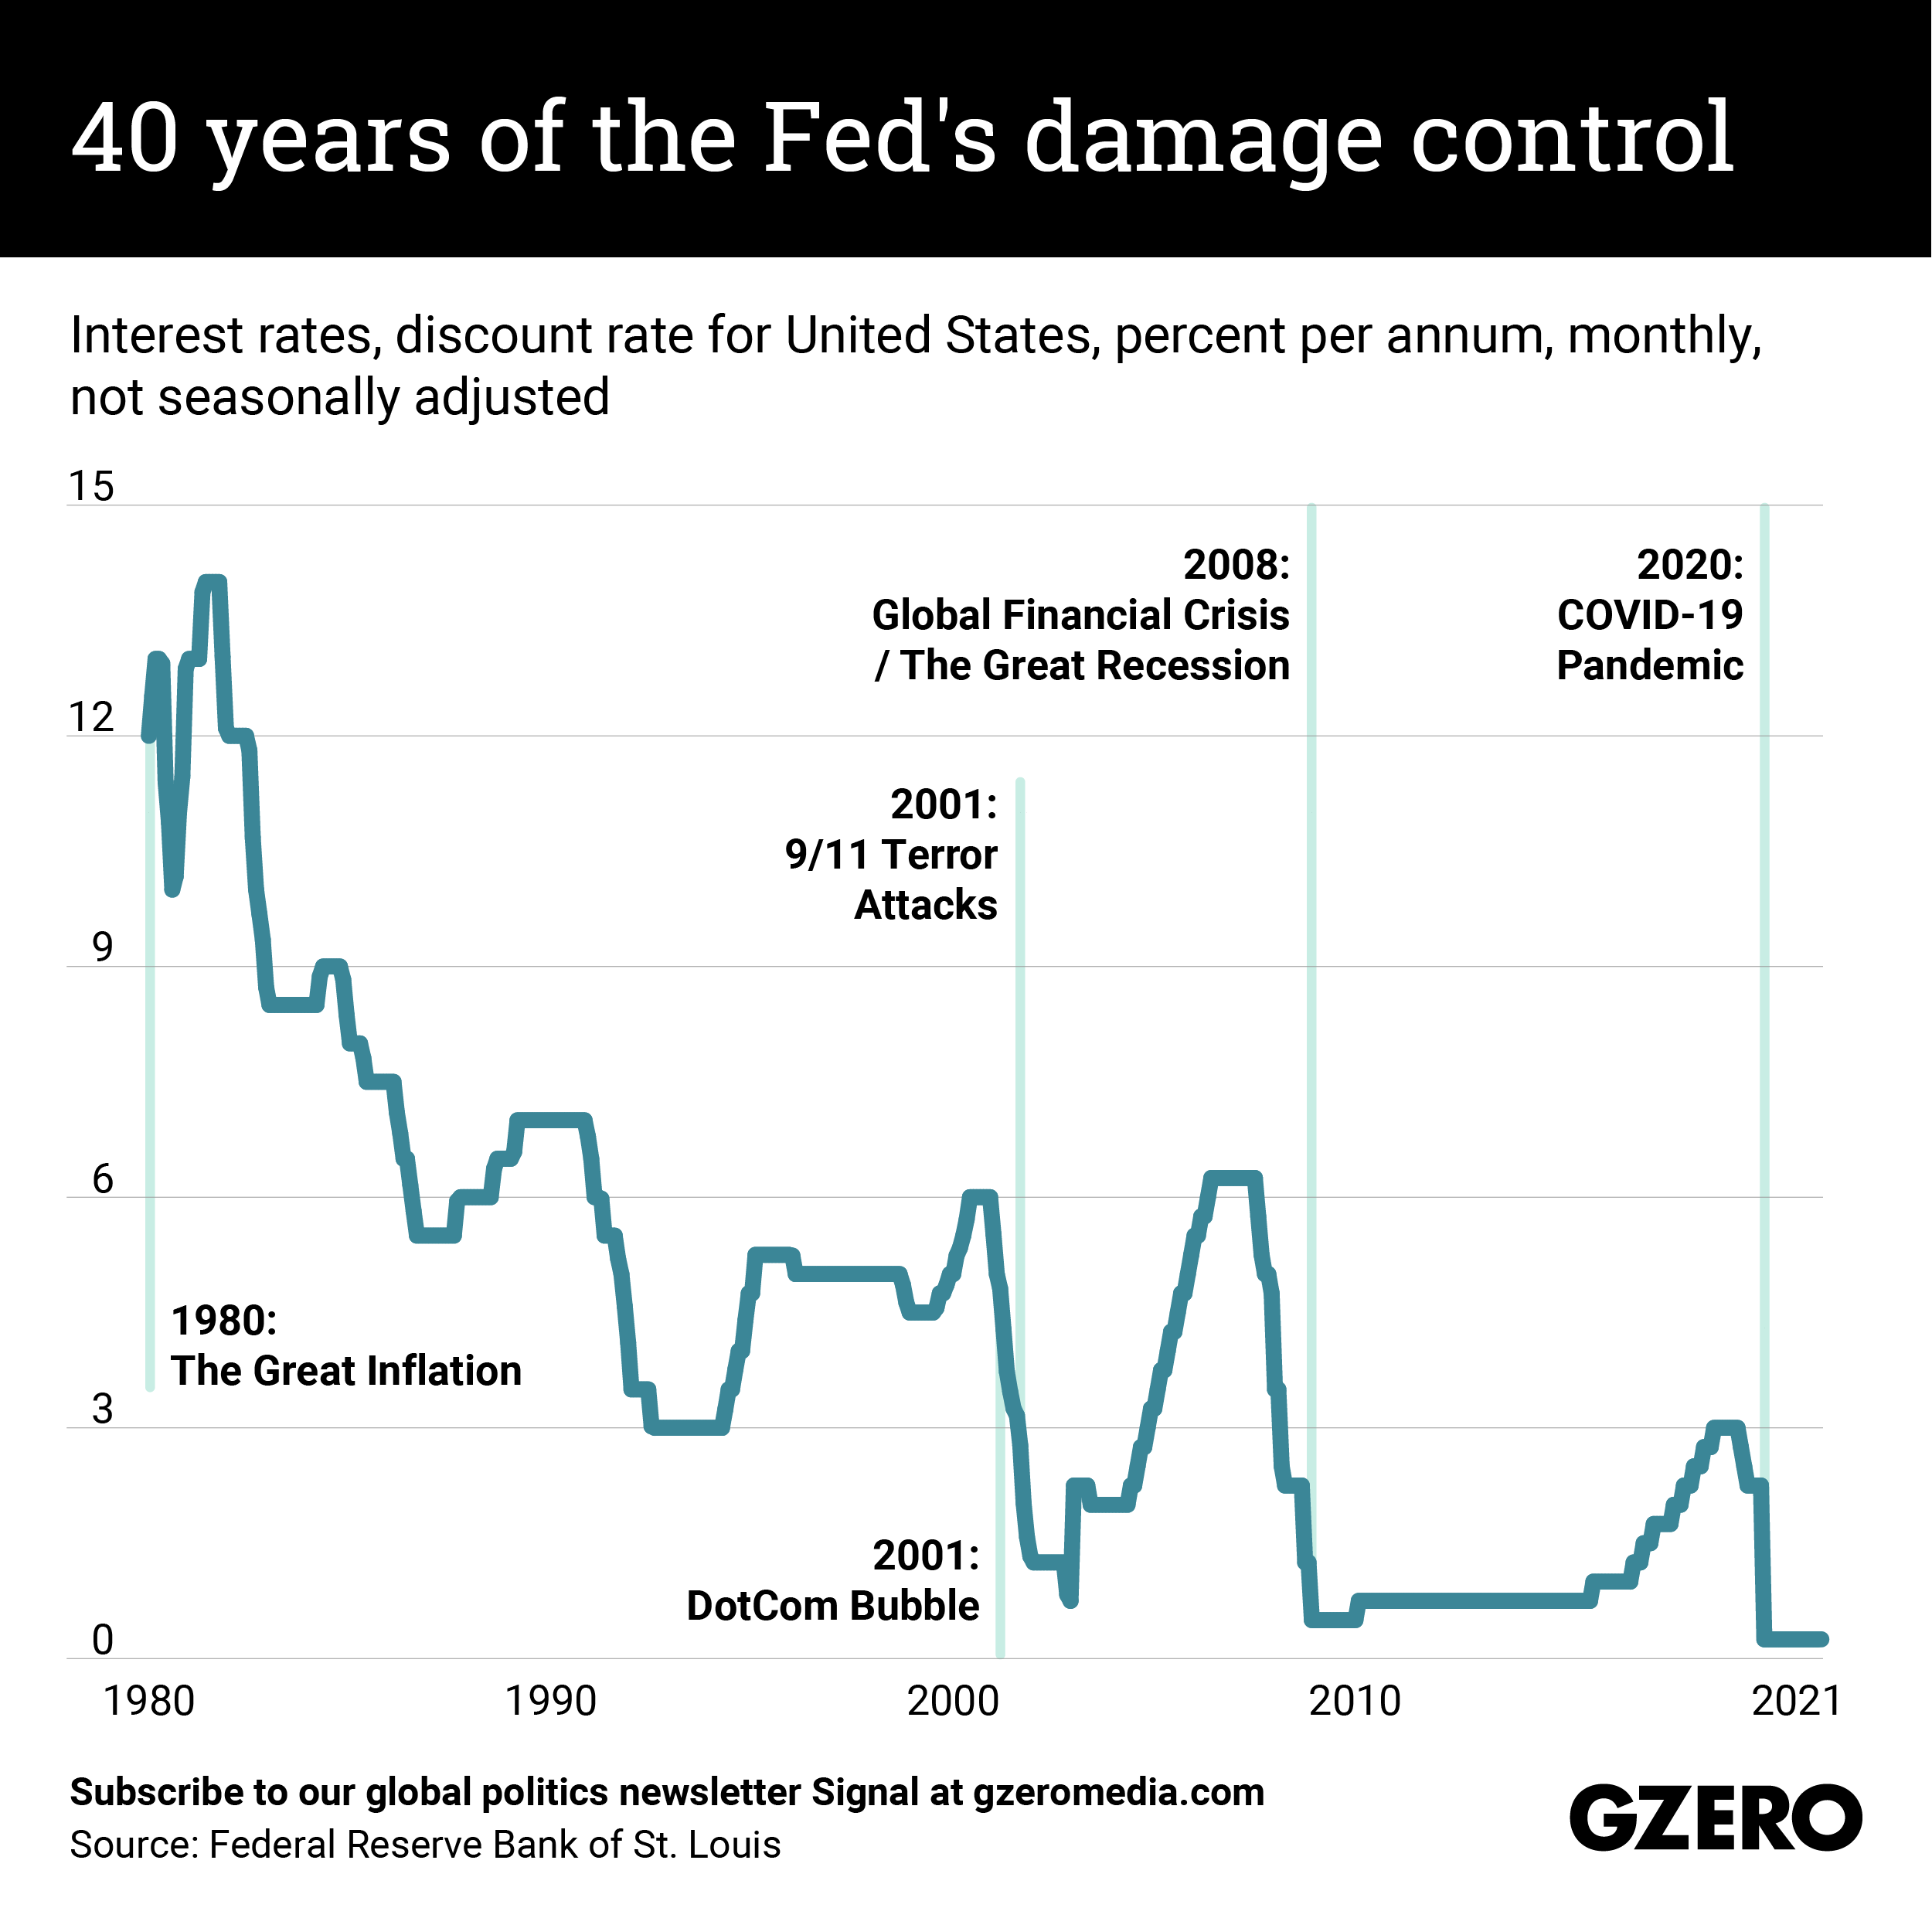 The Graphic Truth: 40 years of the Fed's damage control